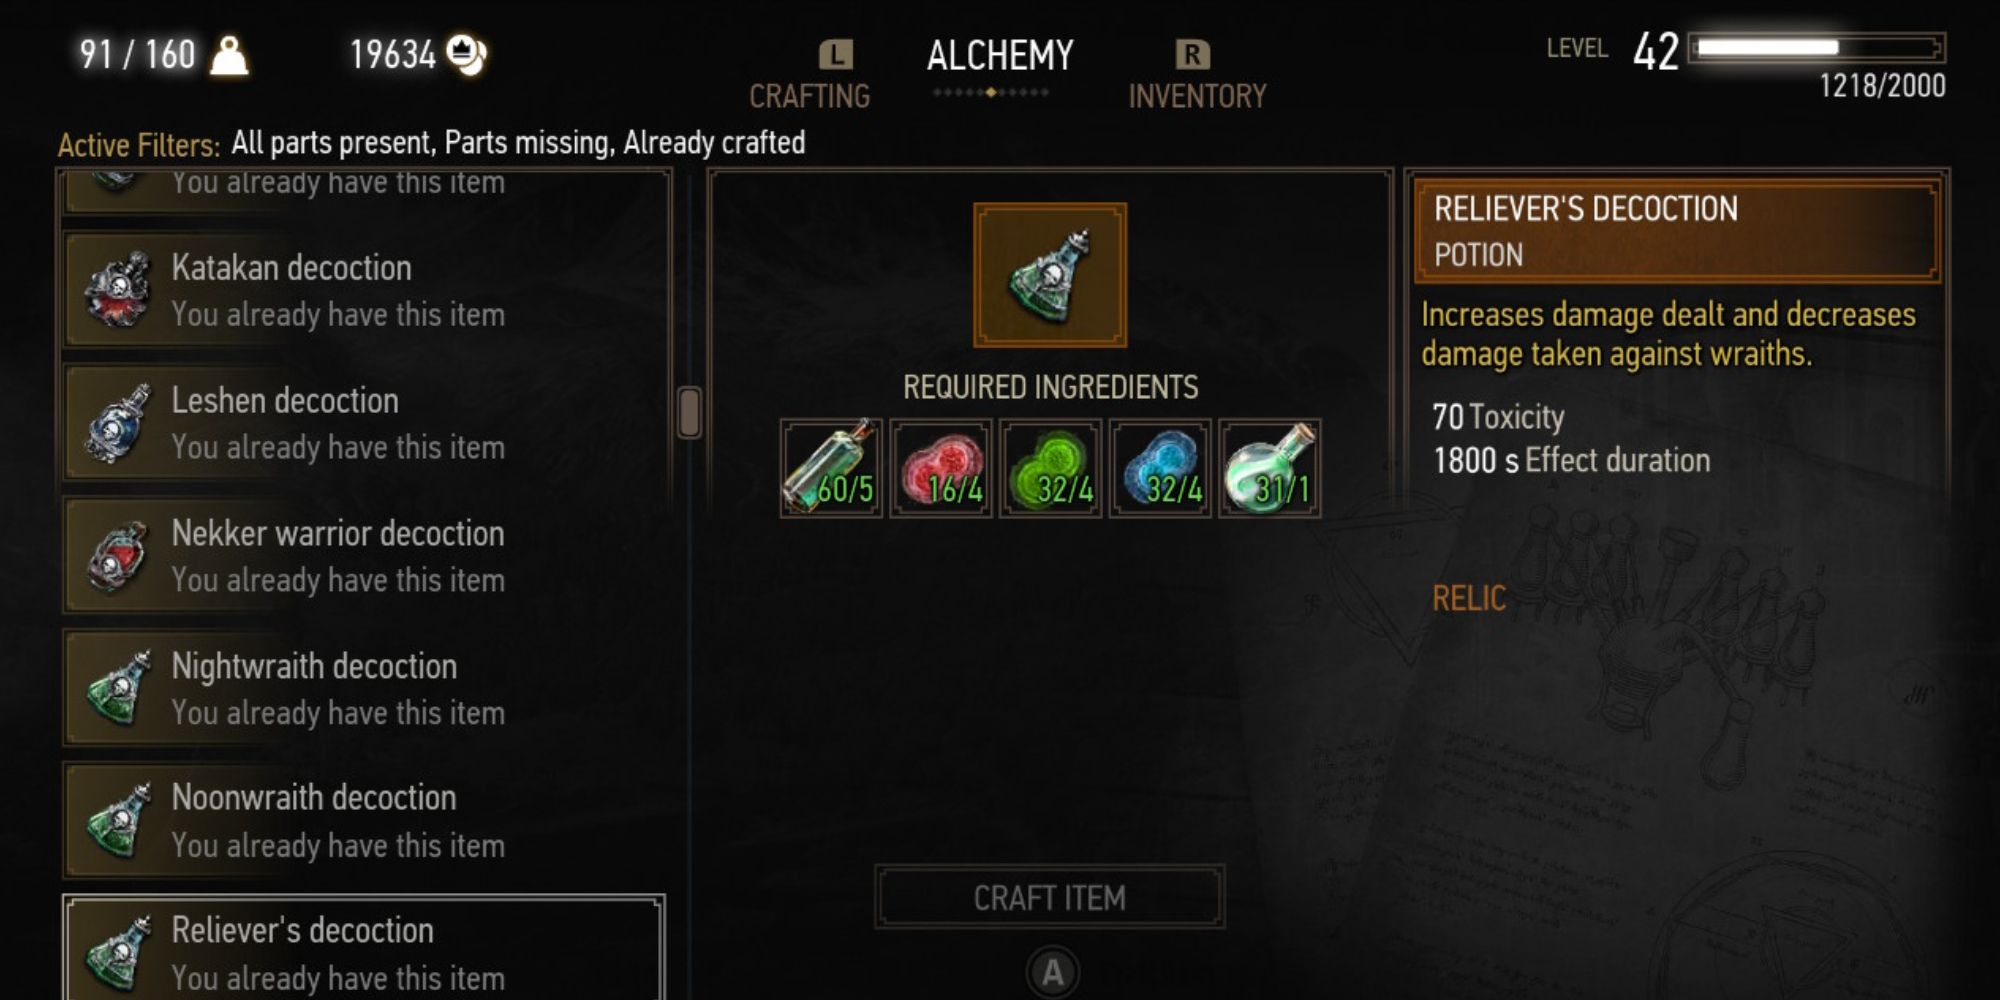 The Witcher 3 Decoctions: Recipe, Effects, and Ingredients